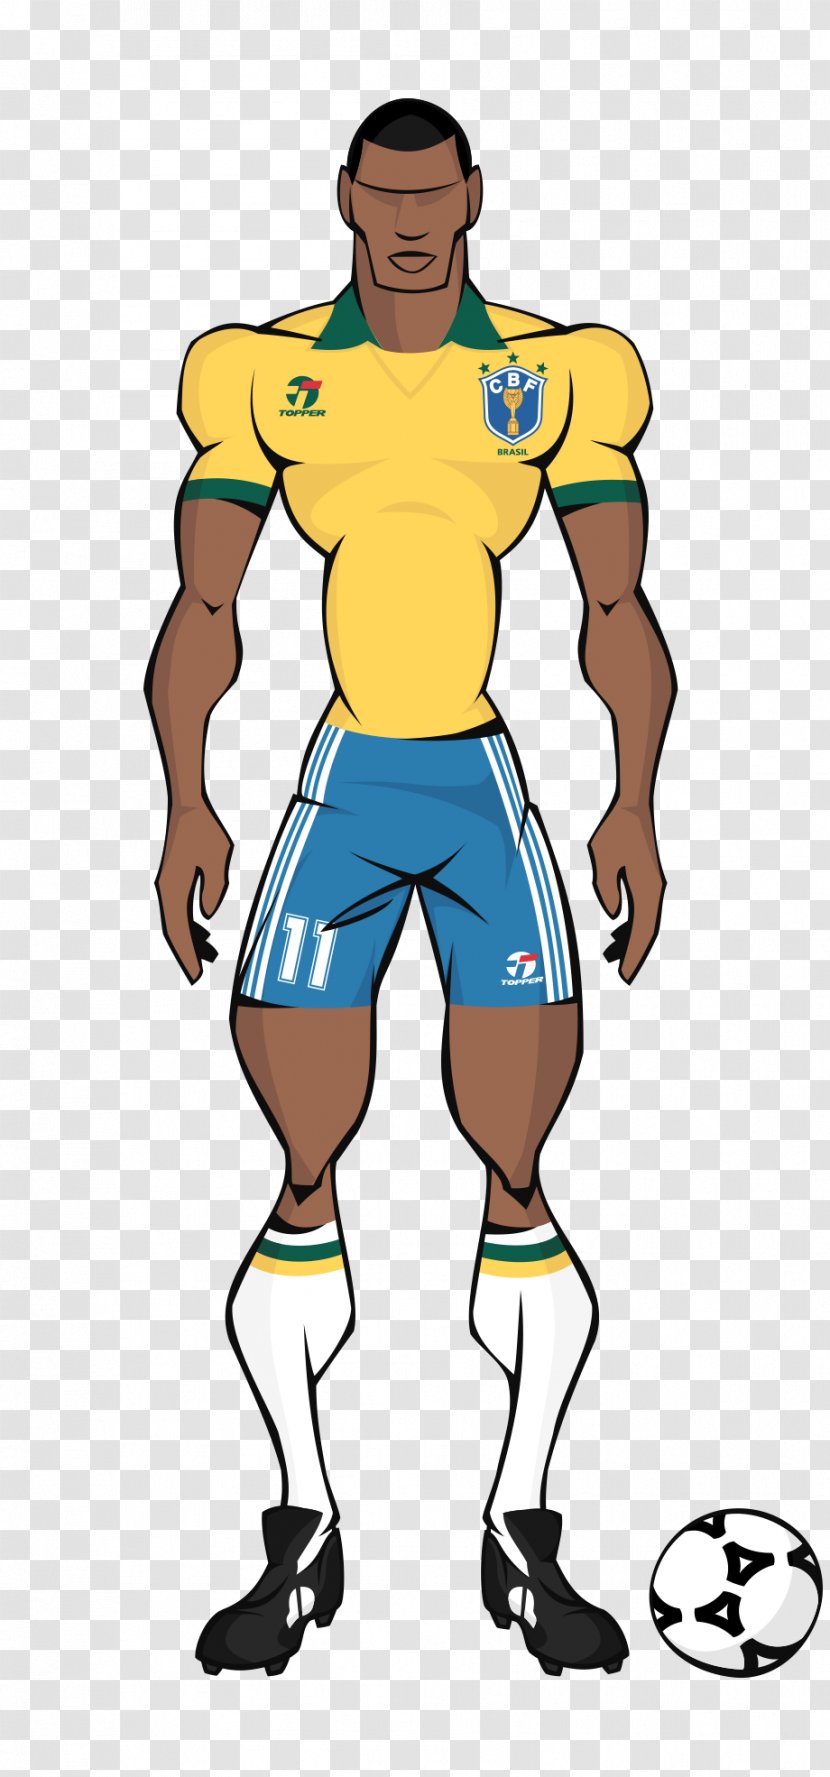 Brazil National Football Team Ricardo Gomes At The 1990 FIFA World Cup 1994 - Clothing Transparent PNG